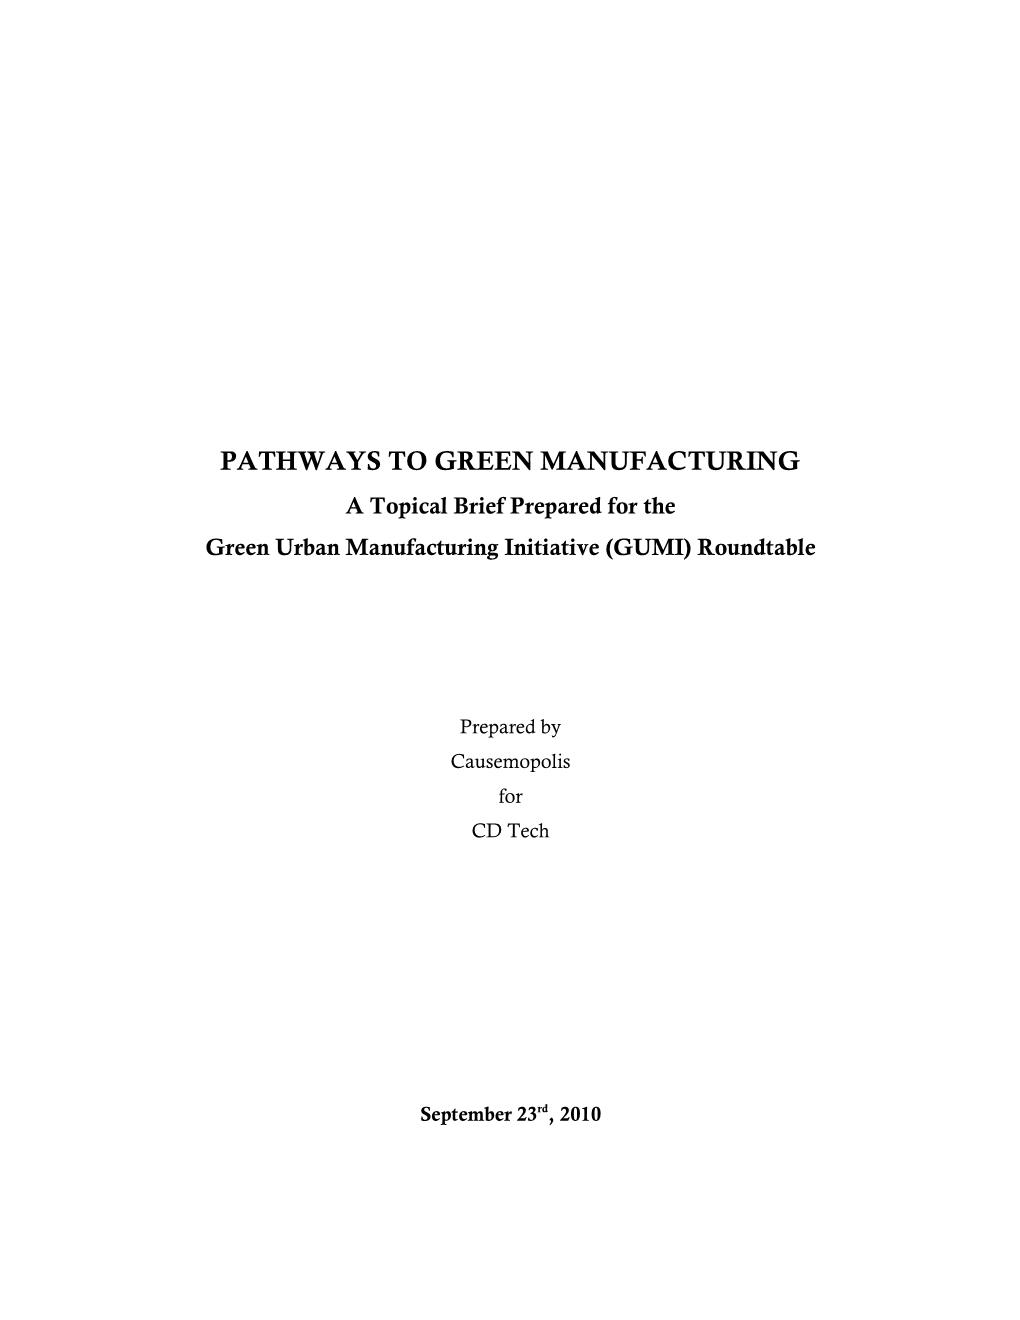 PATHWAYS to GREEN MANUFACTURING a Topical Brief Prepared for the Green Urban Manufacturing Initiative (GUMI) Roundtable